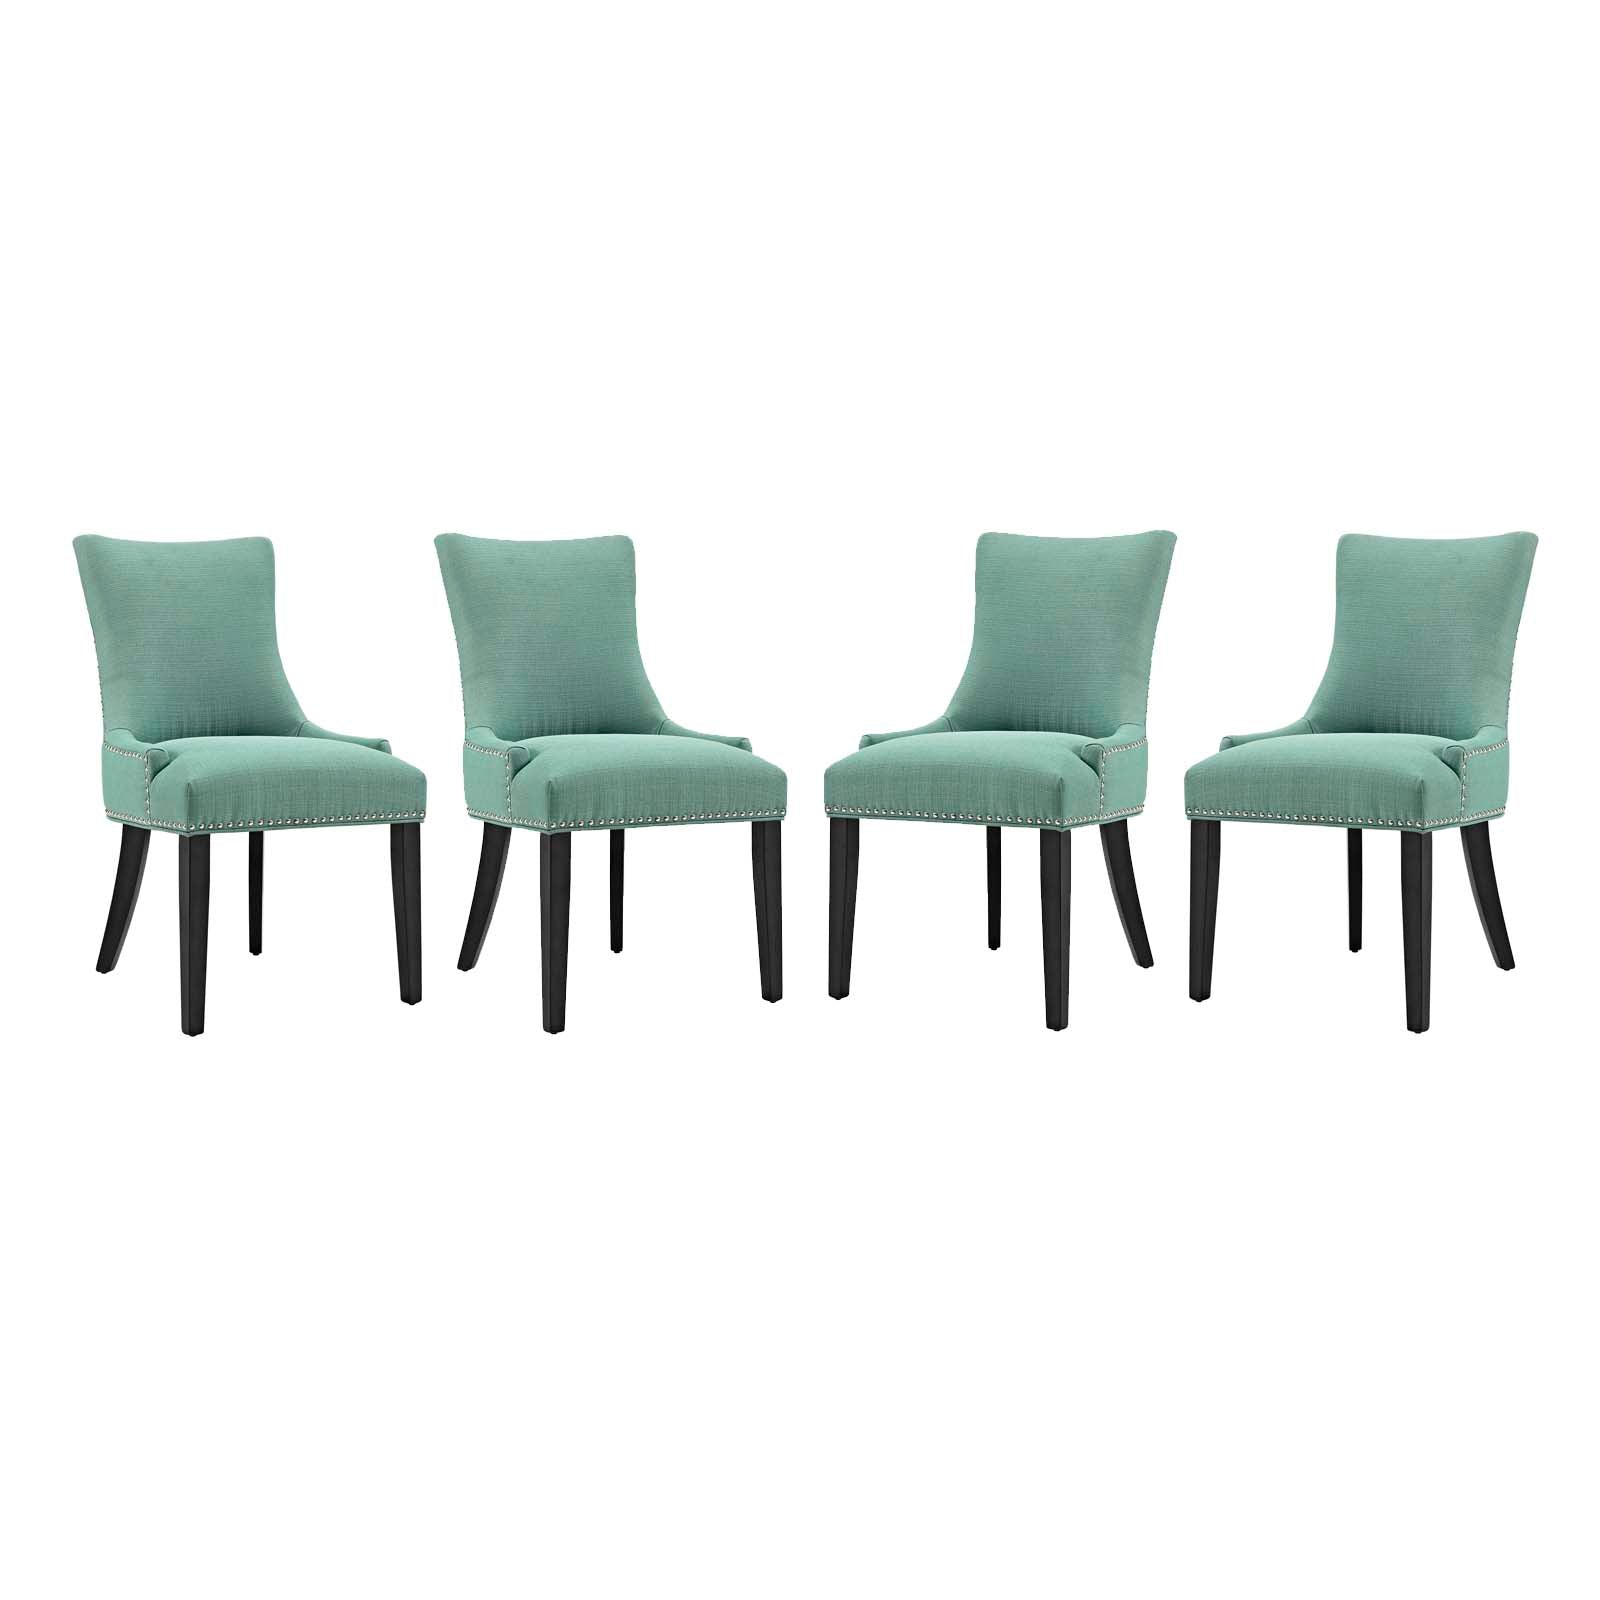 Marquis Dining Chair Fabric Set of 4 - East Shore Modern Home Furnishings